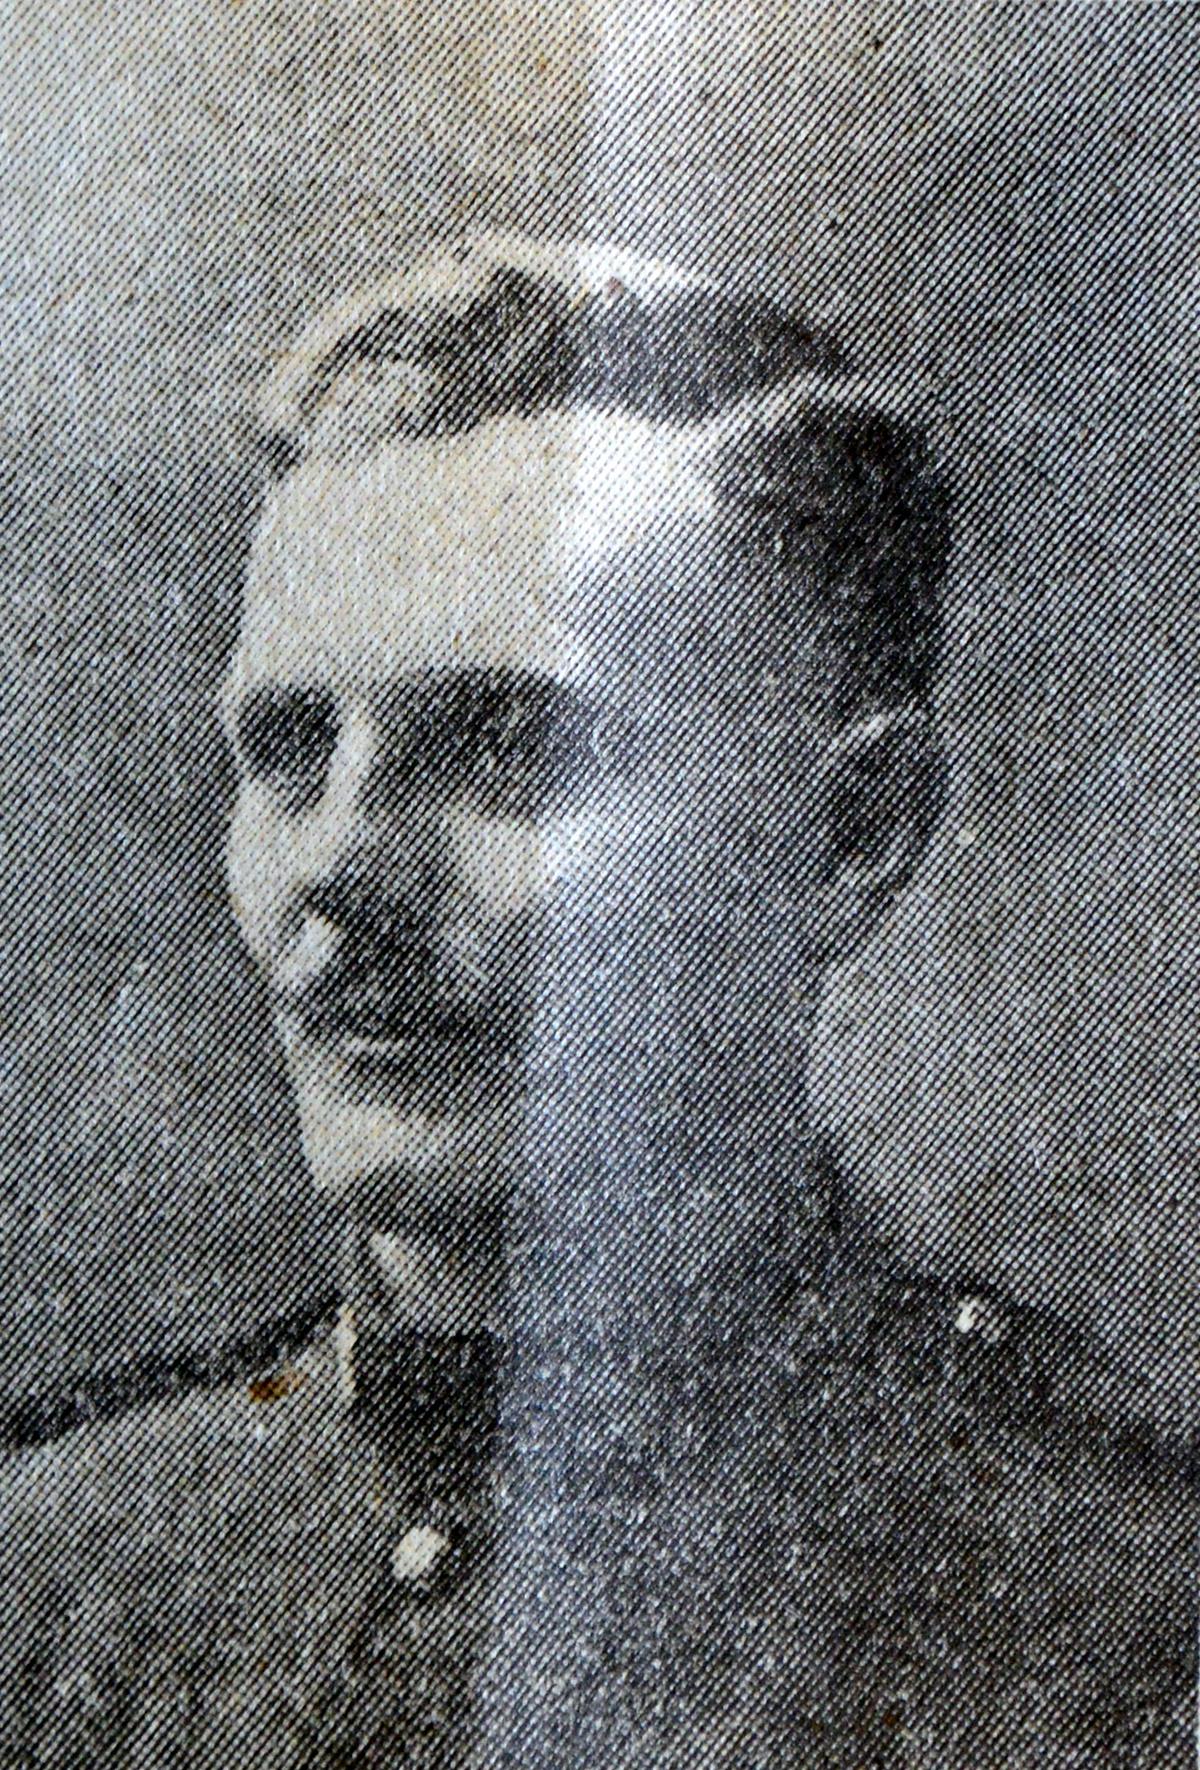 Pte Roger Wilson, of Longsleddale, who served with the Canadian forces and died at Vimy Ridge in 1917